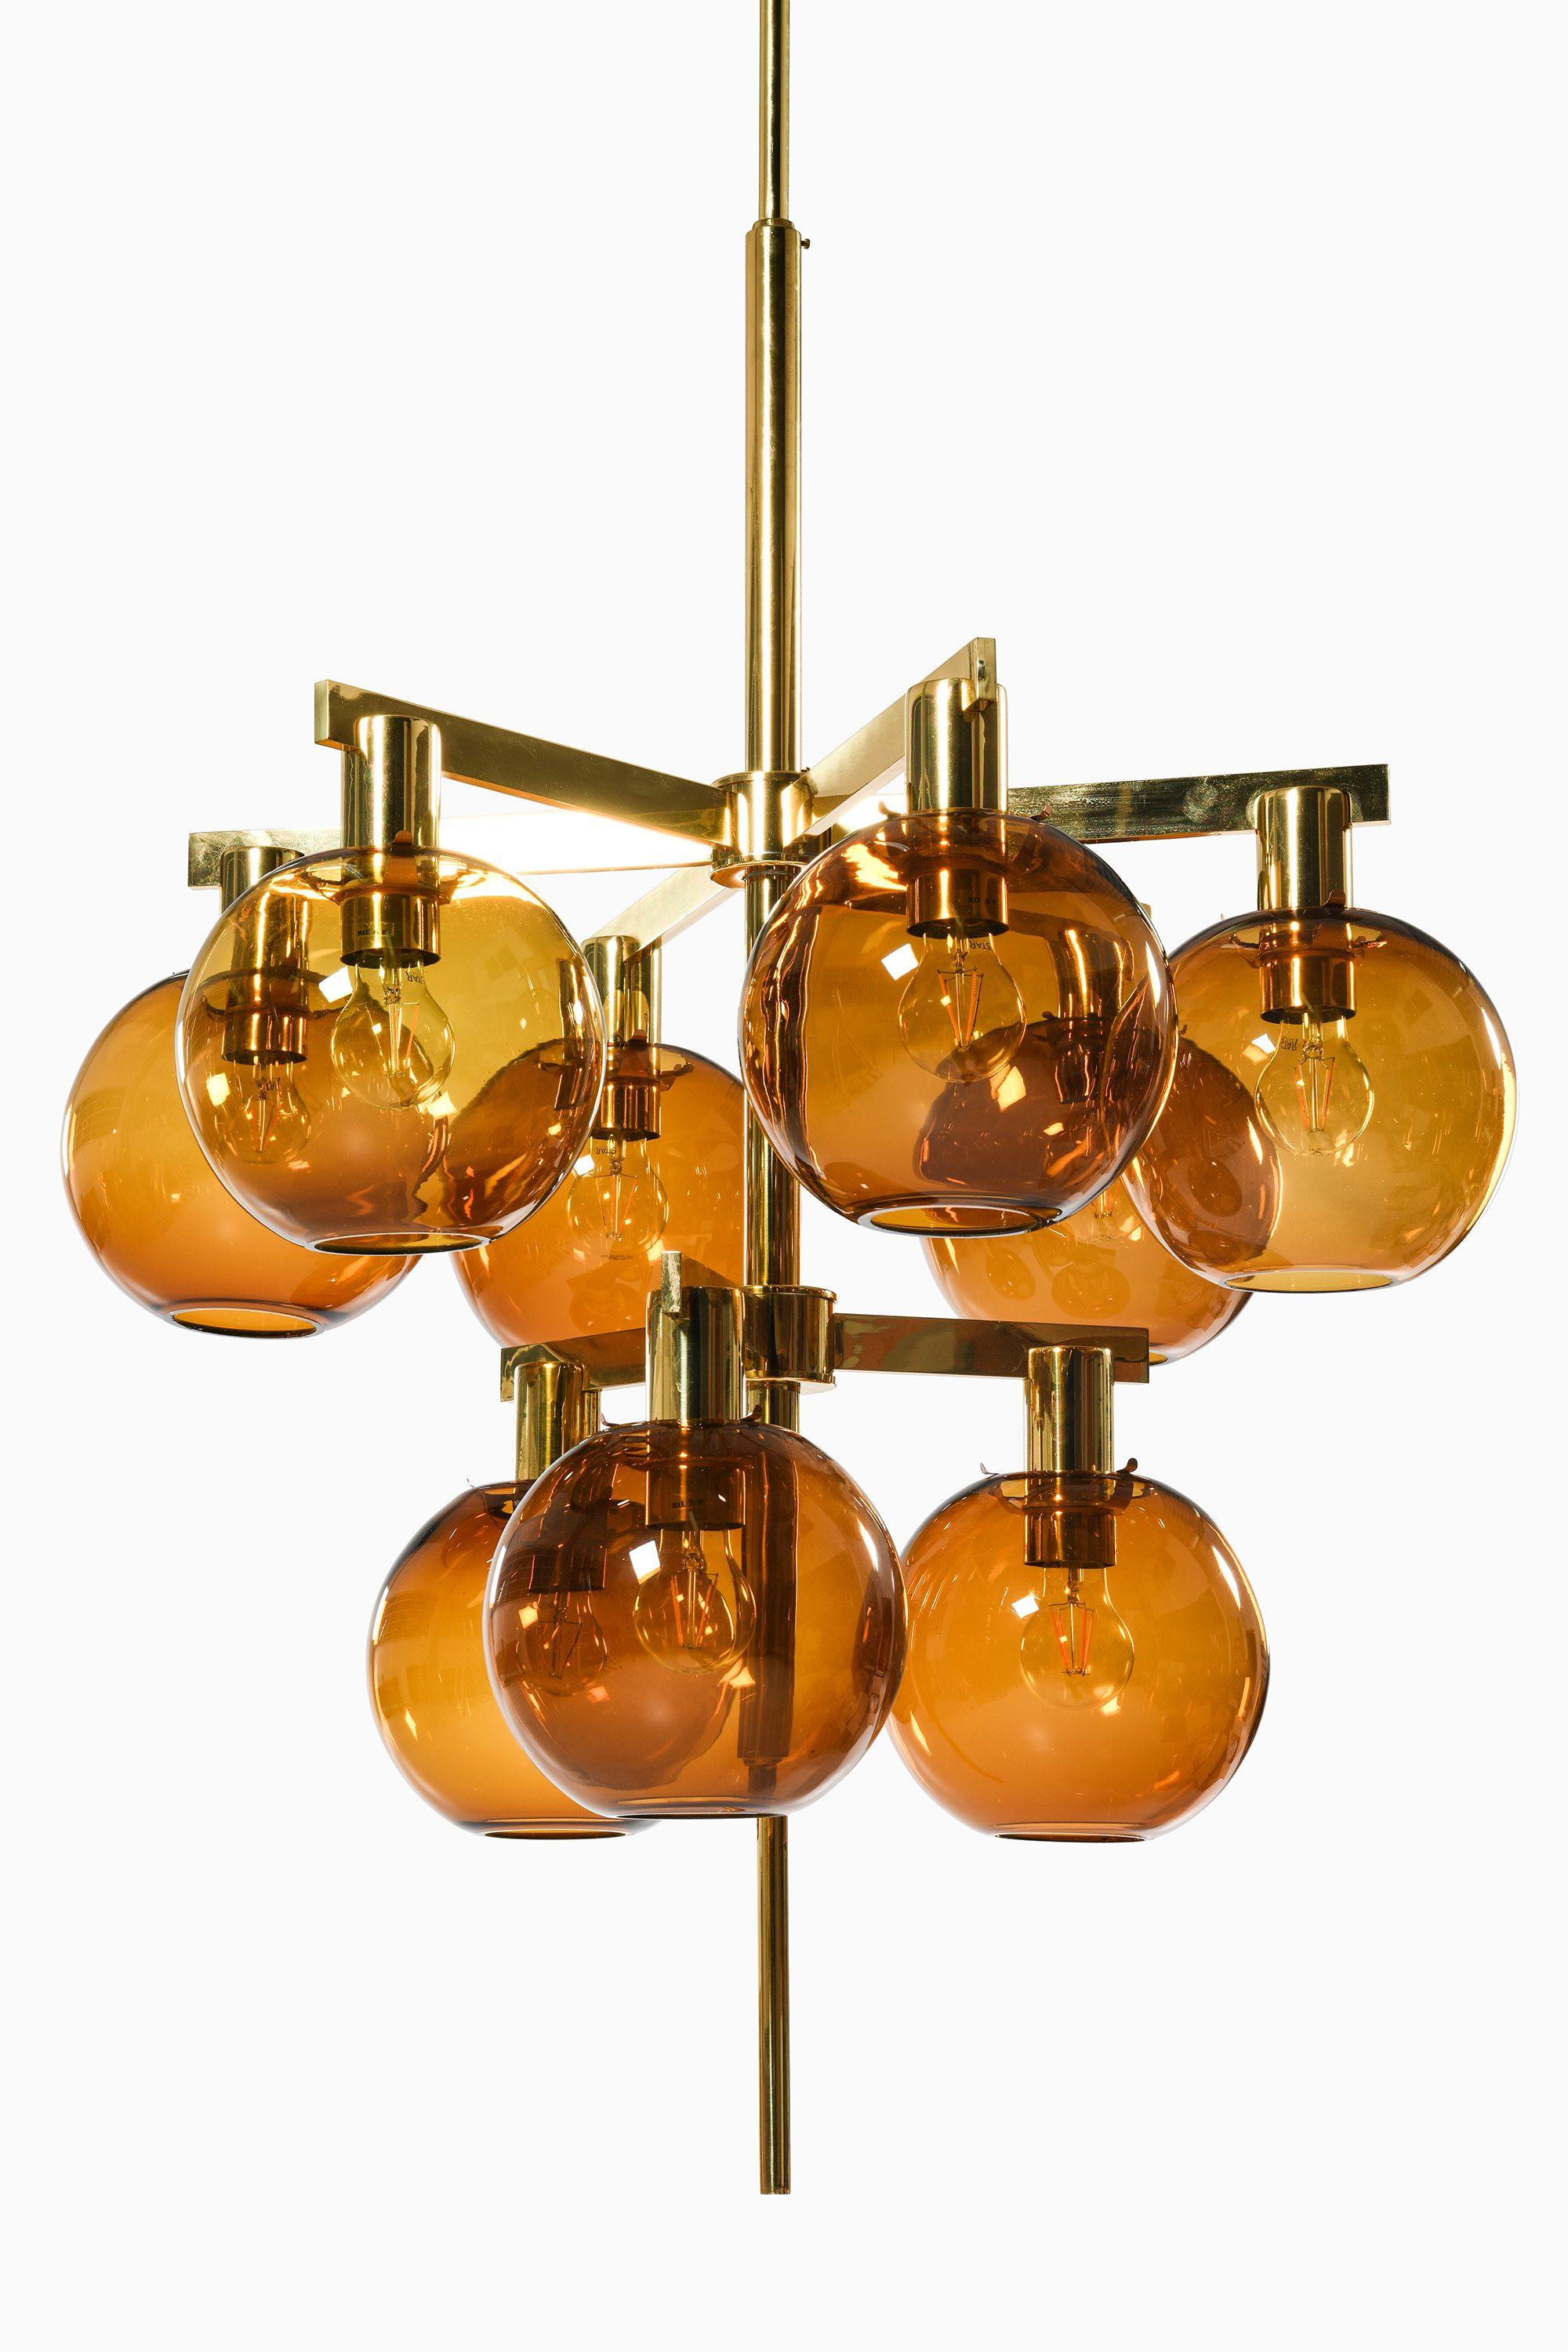 Ceiling Lamp in Brass and Amber Glass by Hans-Agne Jakobsson, 1950's

Additional Information:
Material: Brass and amber glass
Style: Mid century, Scandinavian
Rare ceiling lamp model T 348/9
Produced by Hans-Agne Jakobsson AB in Markaryd,